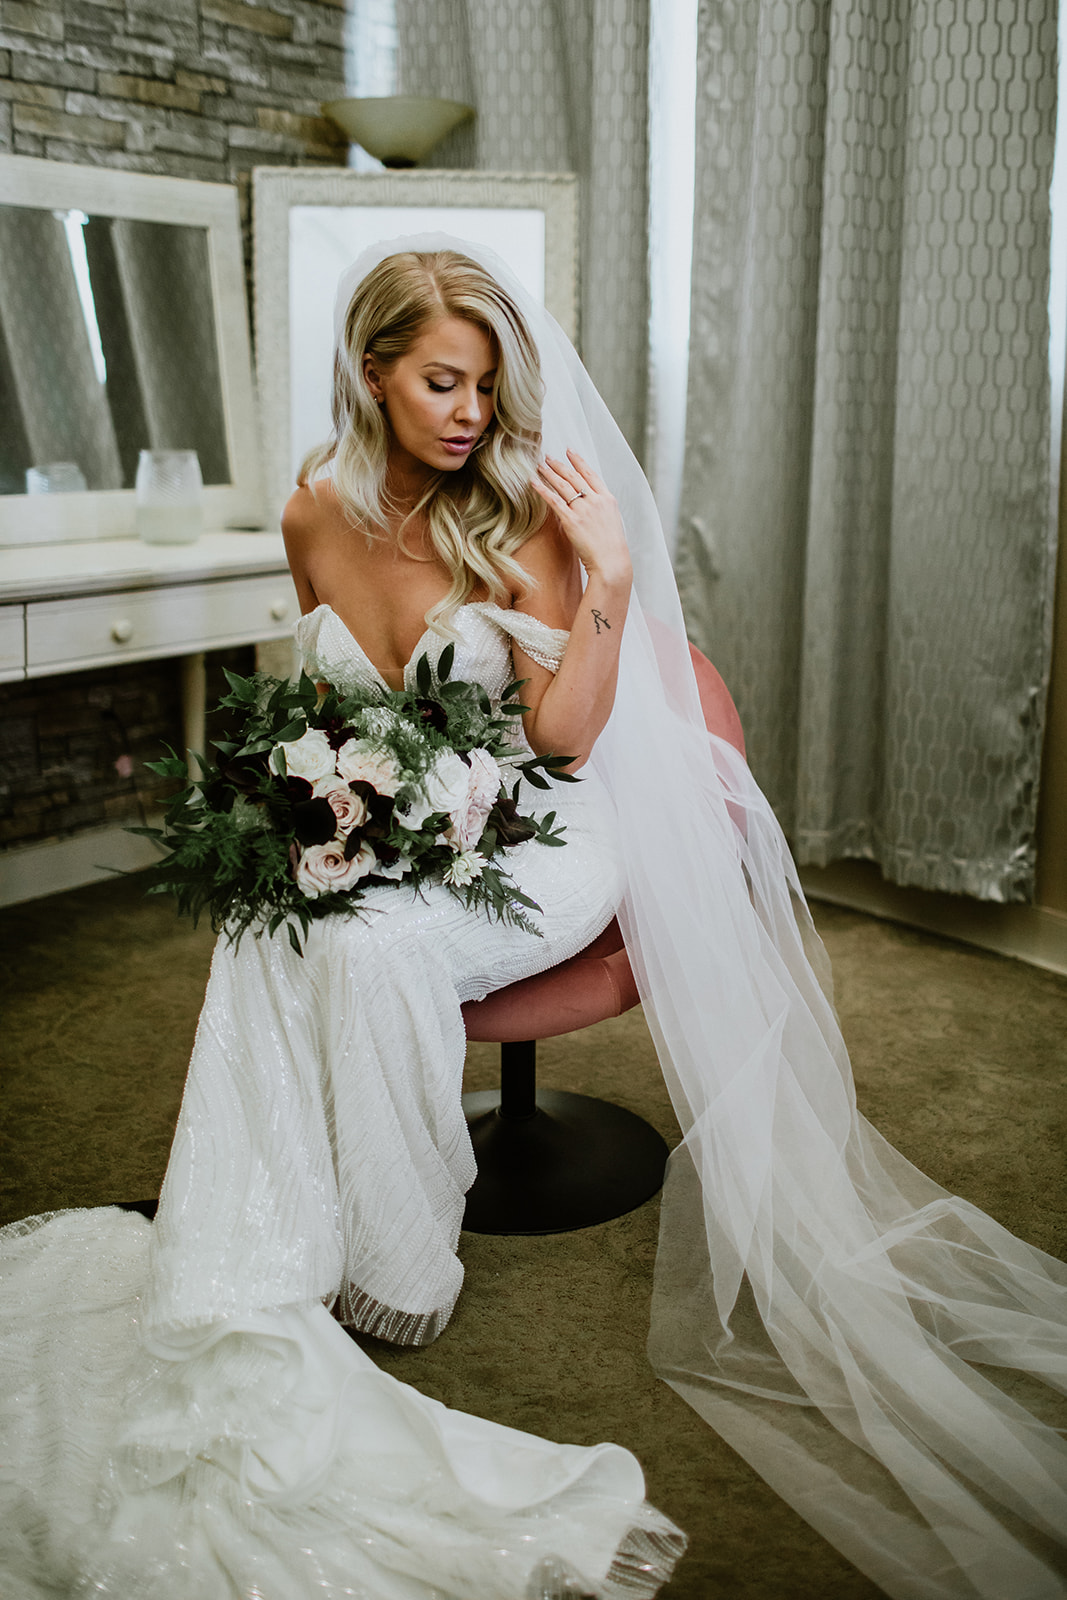 Bride with Veil holding Moody Bouquet in Bridal Suite before Moody Modern Glam Lotus House Wedding 